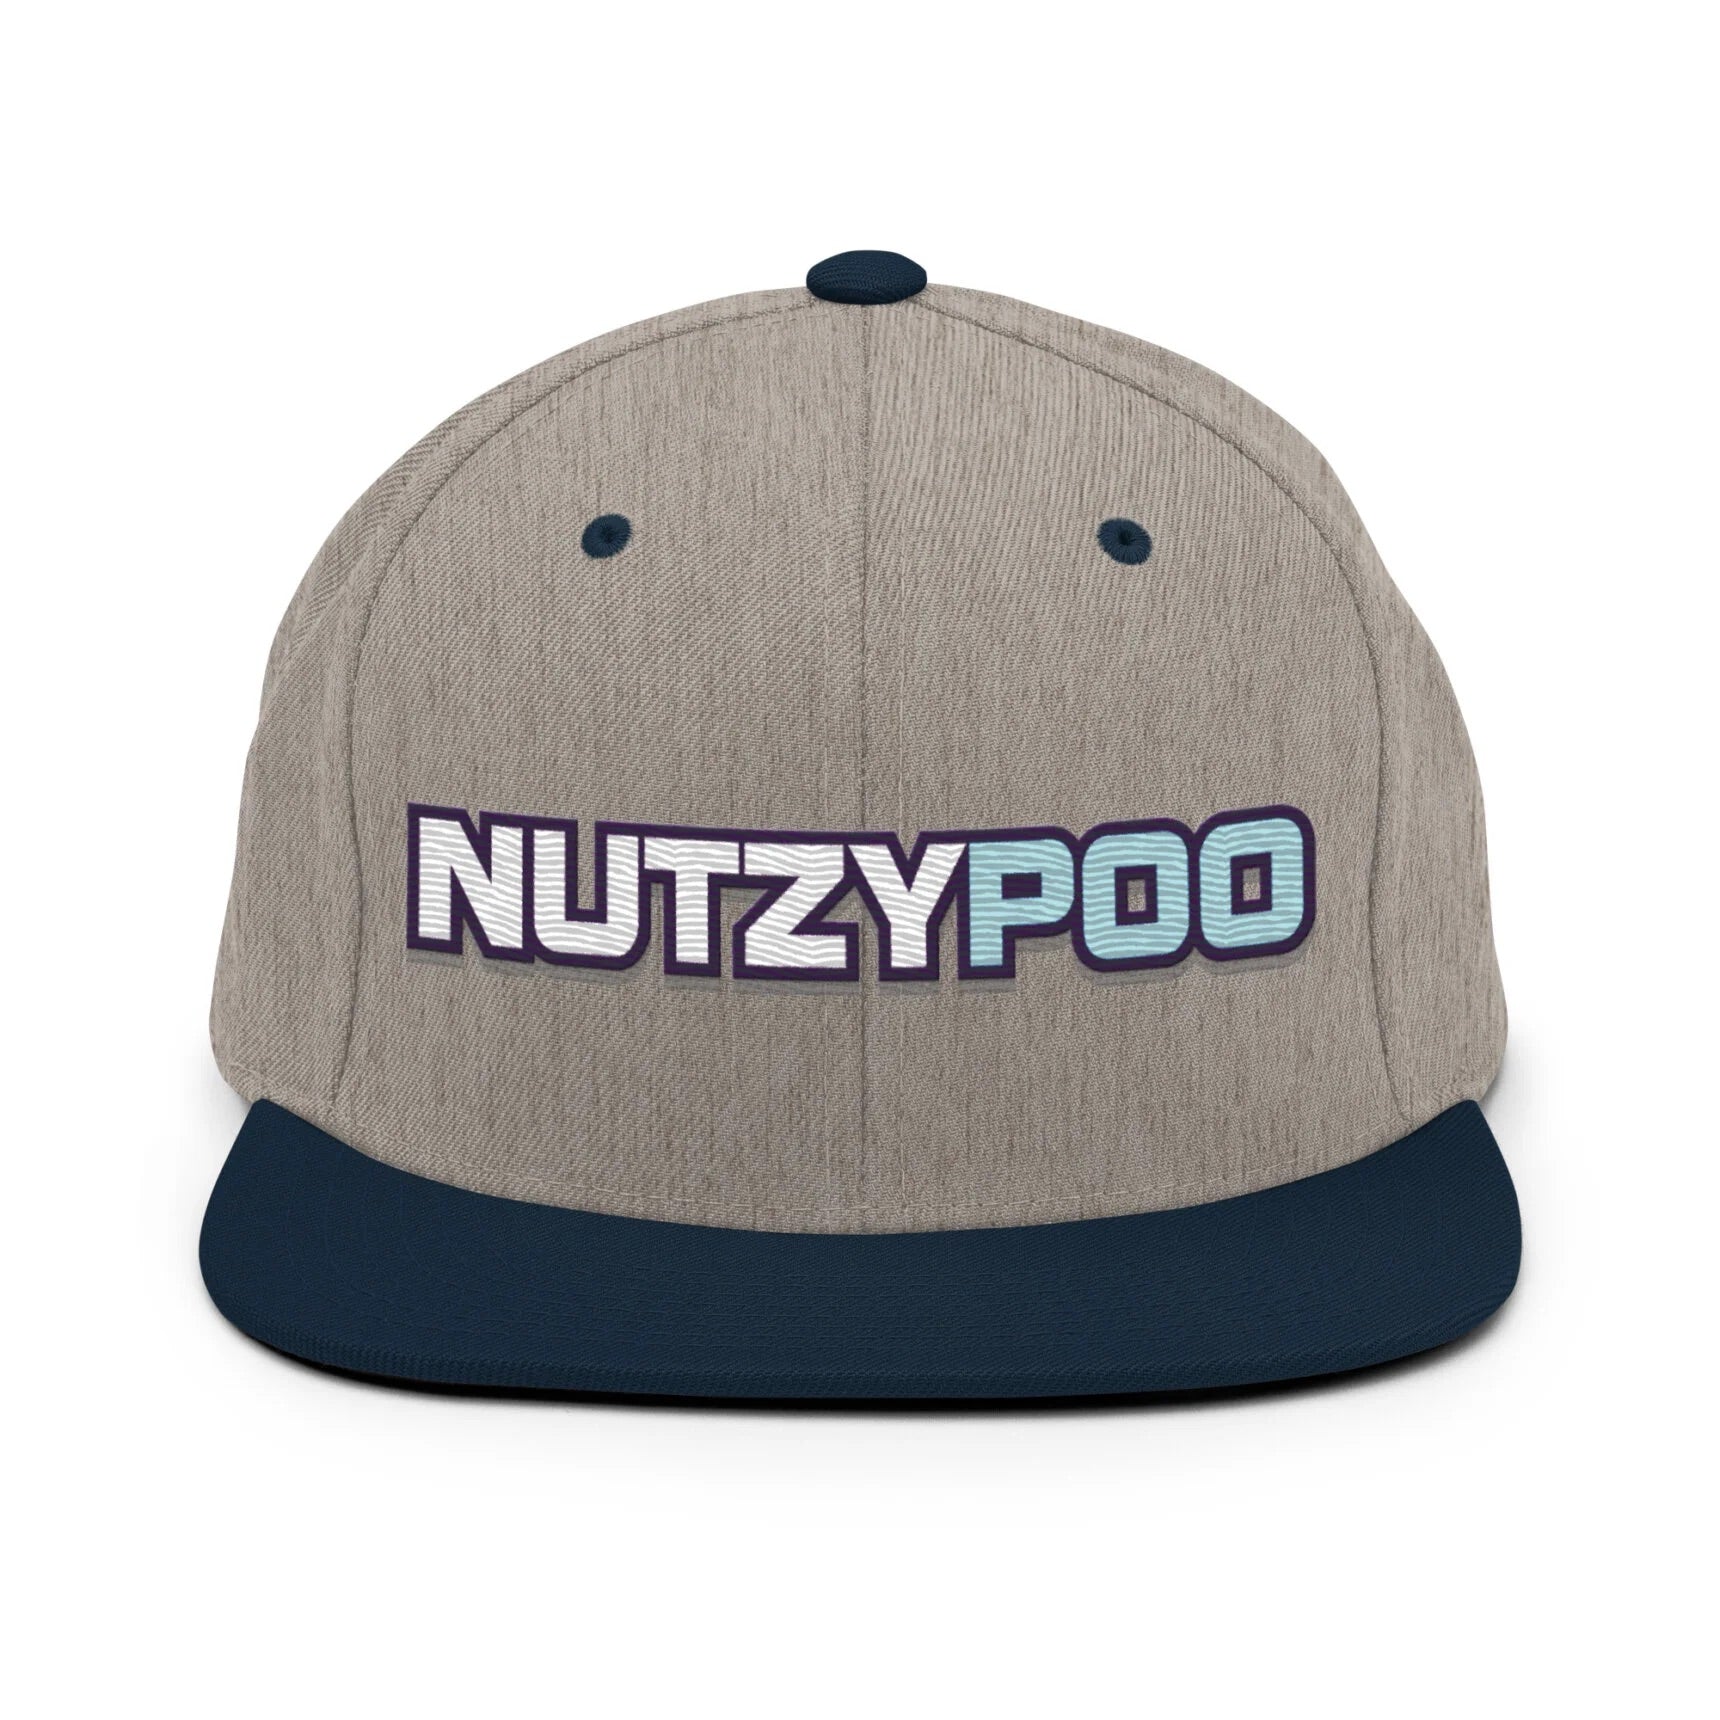 NutzyPoo ShowZone hat in heather grey with navy brim and accents